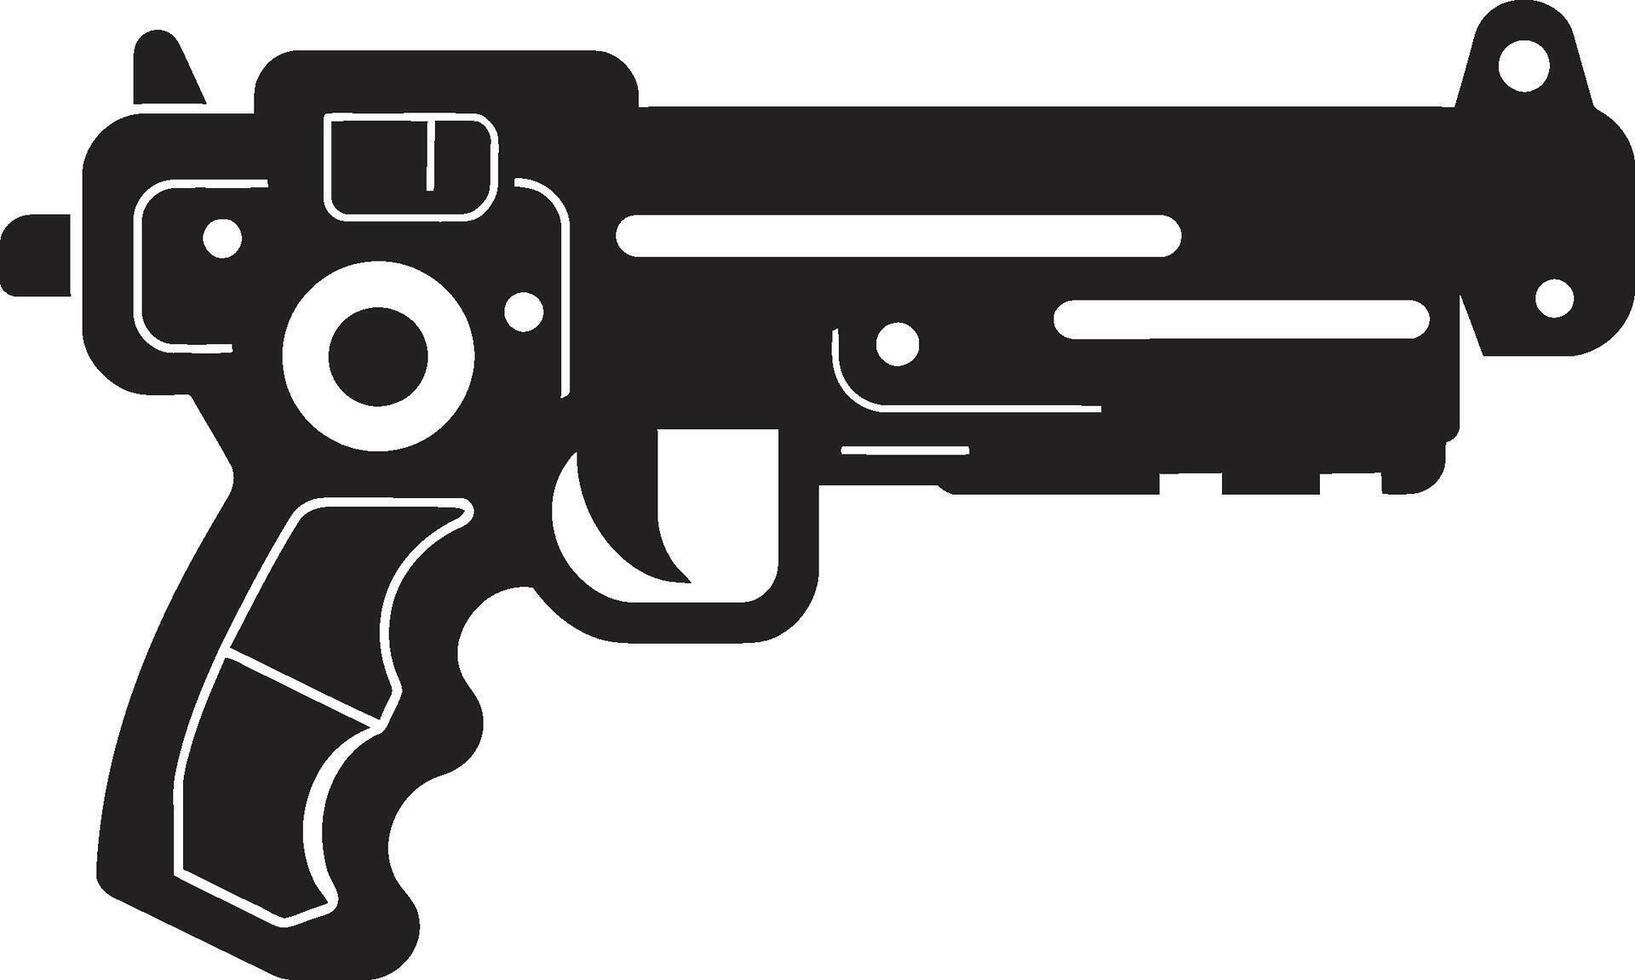 Plastic Battle Gear Vector Symbol of a Toy Gun in Black Playtime Peacekeeper Dynamic Black Icon with Toy Gun Logo Design